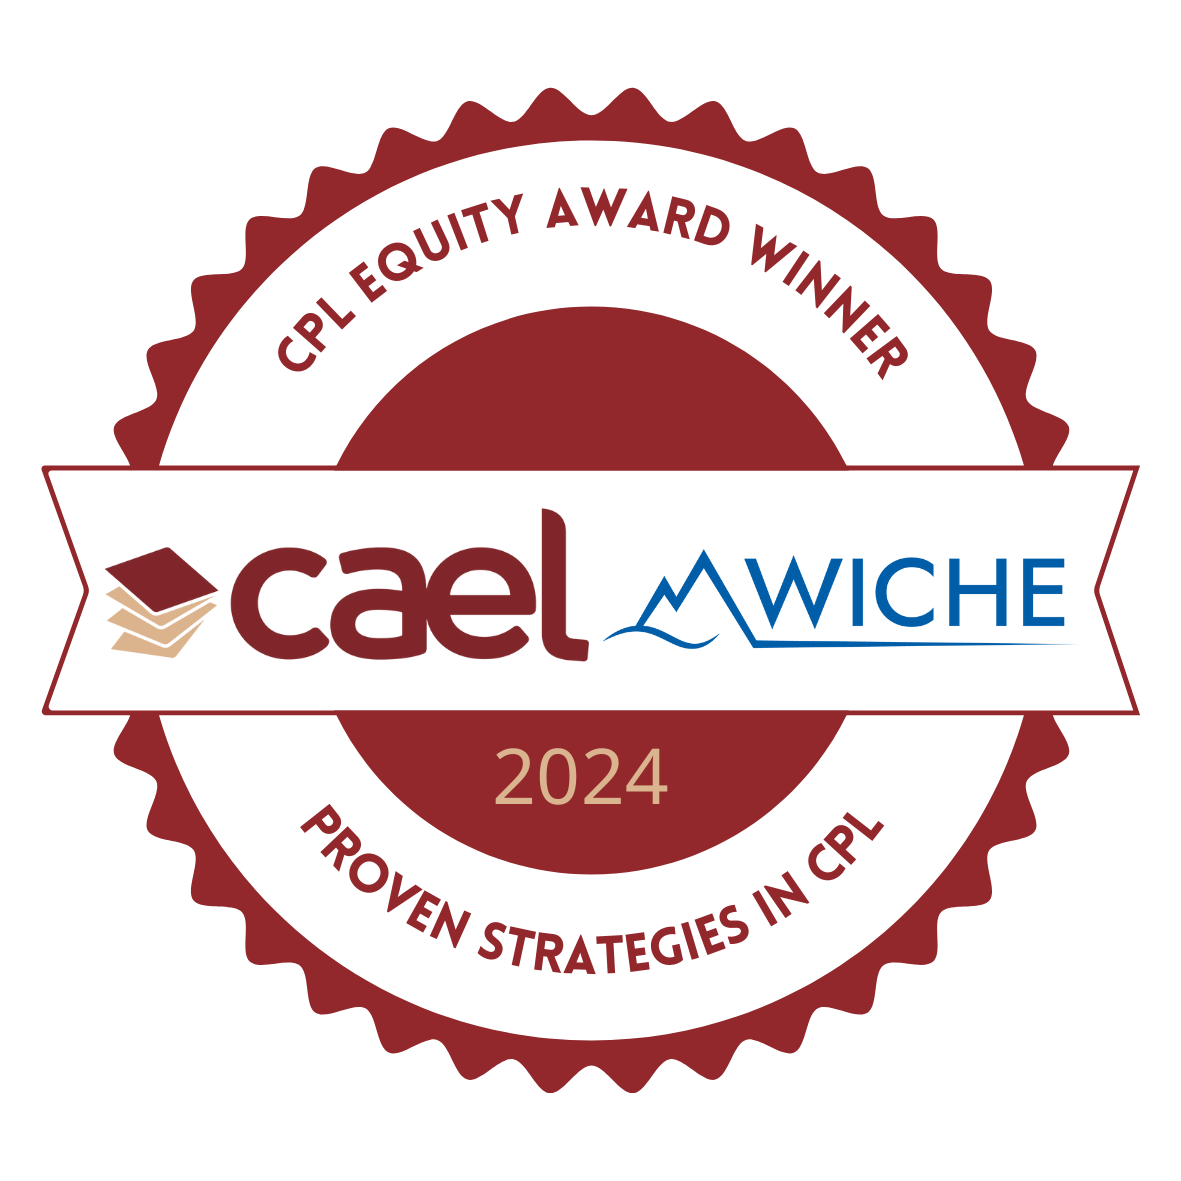 Copy of 2024 CAEL WICHE CPL Equity Award Seal  